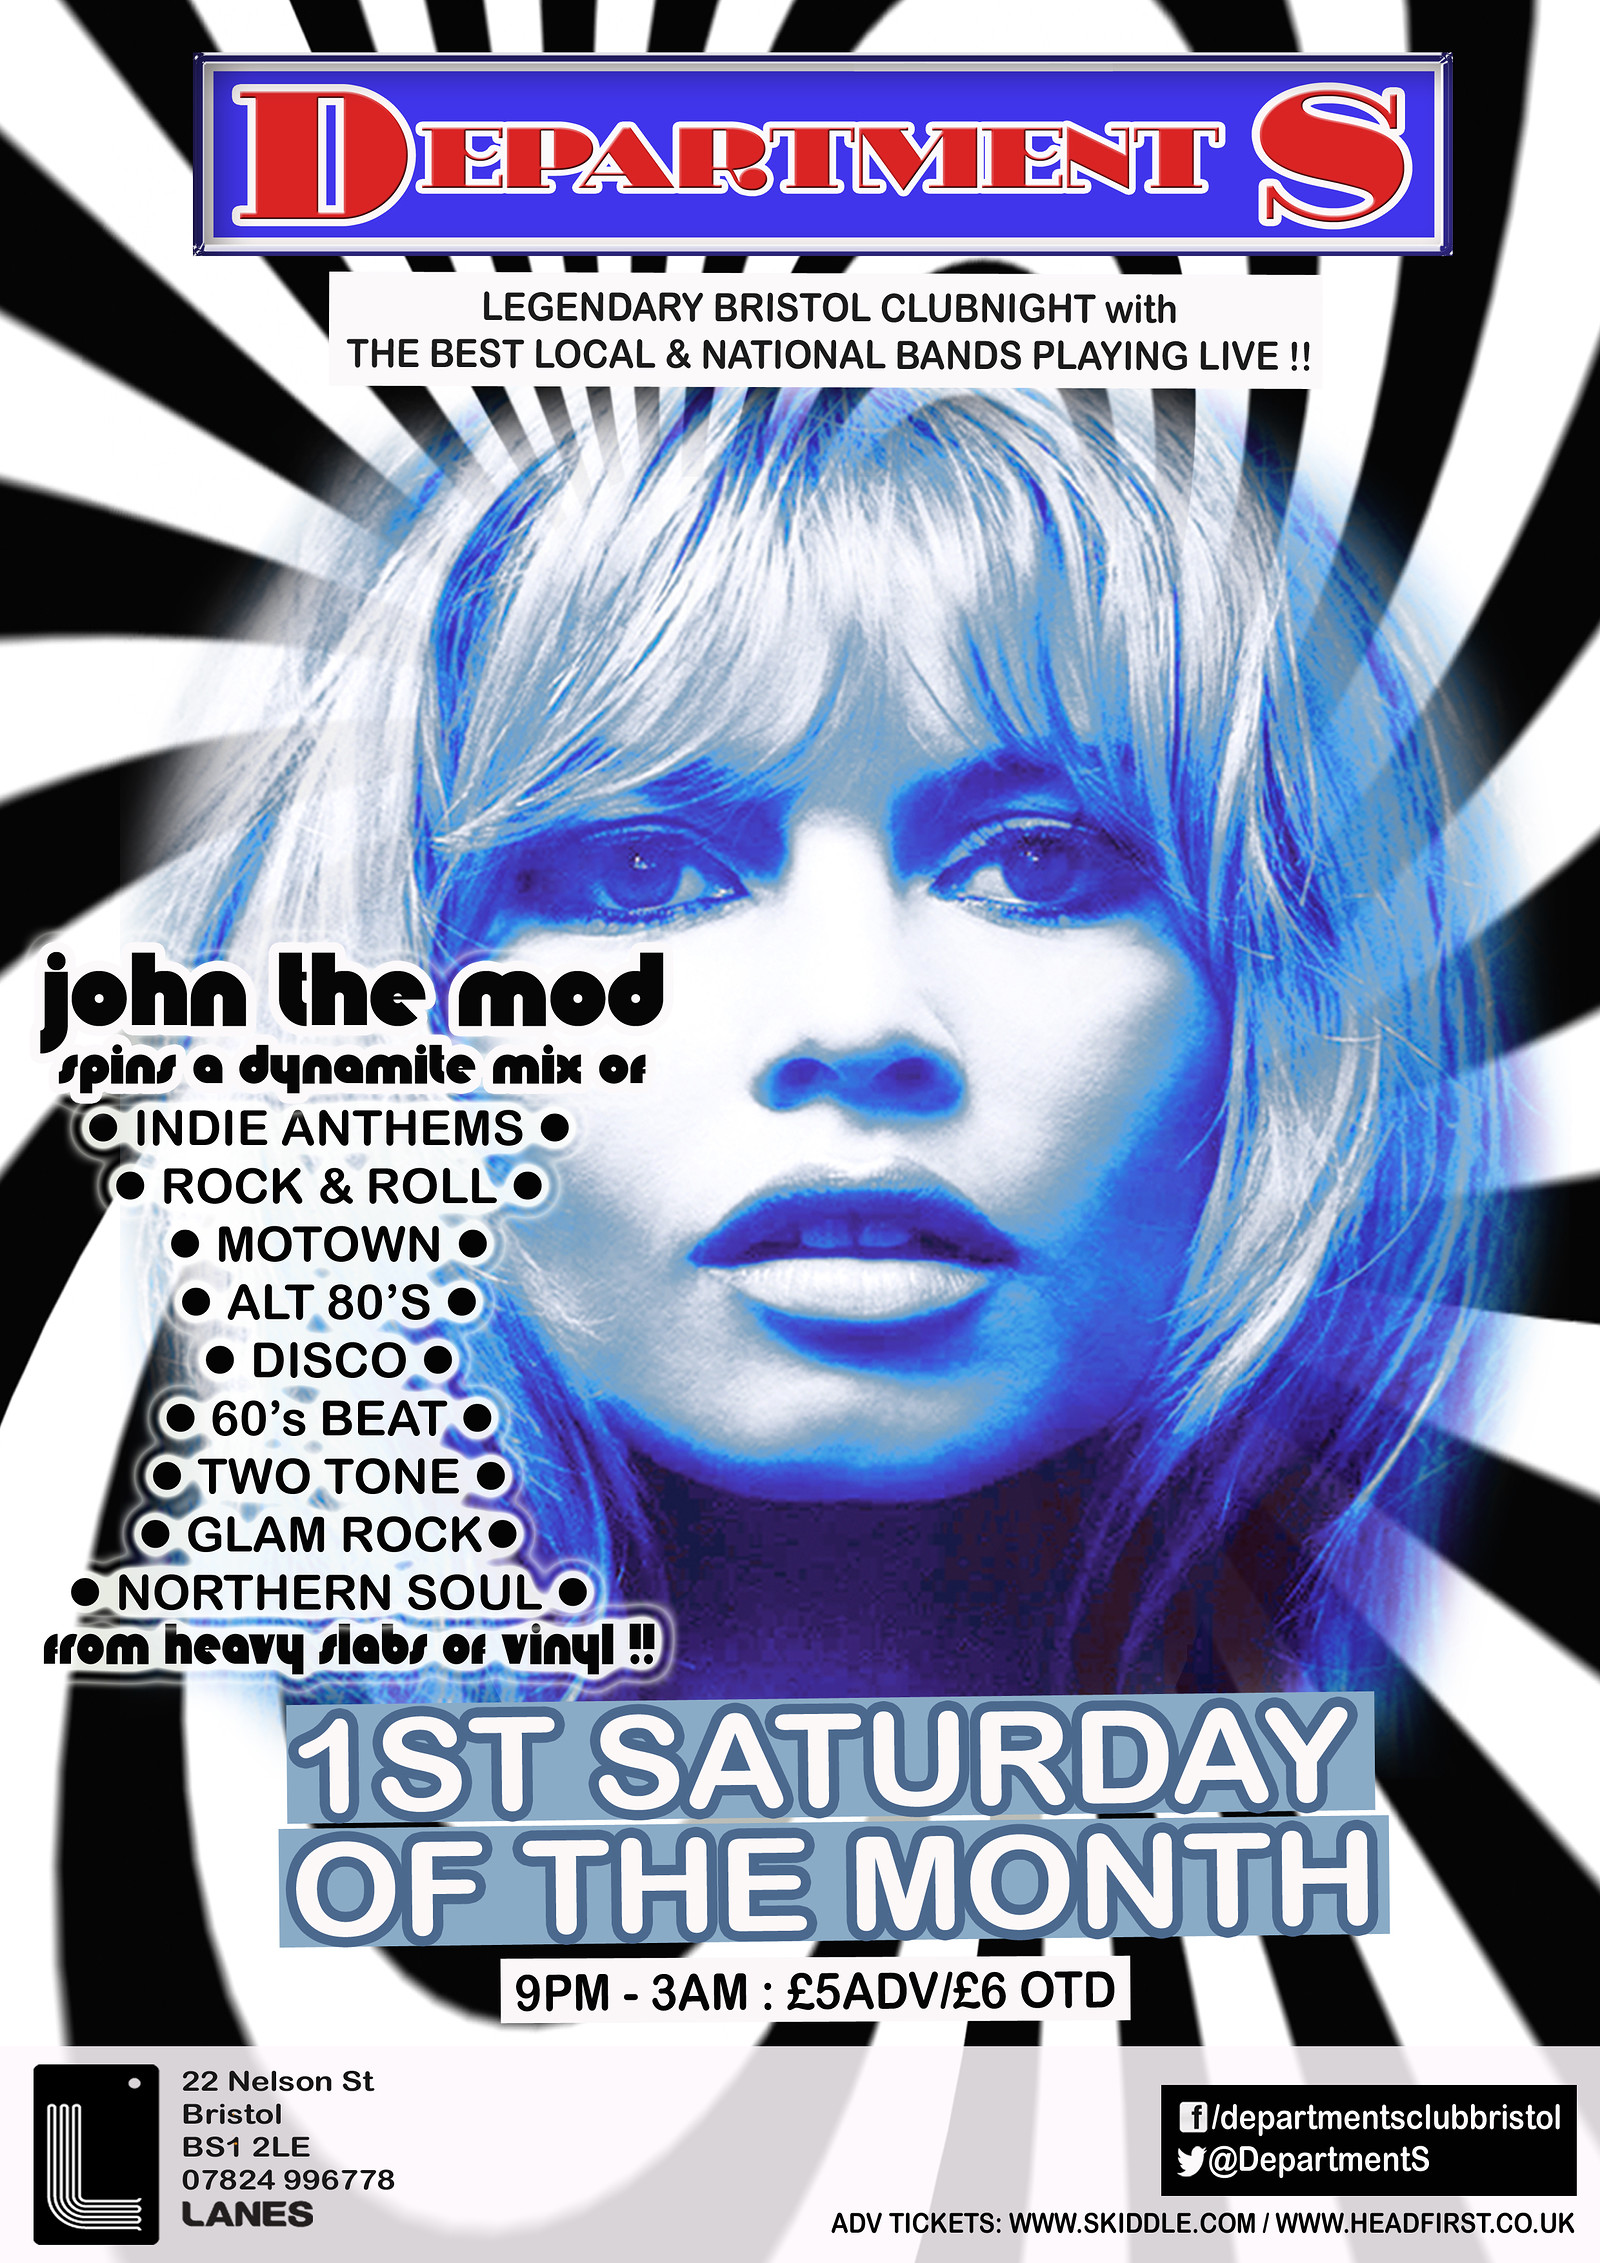 ✰ Department S Club Night ✰ John The Mod ✰ at The Lanes